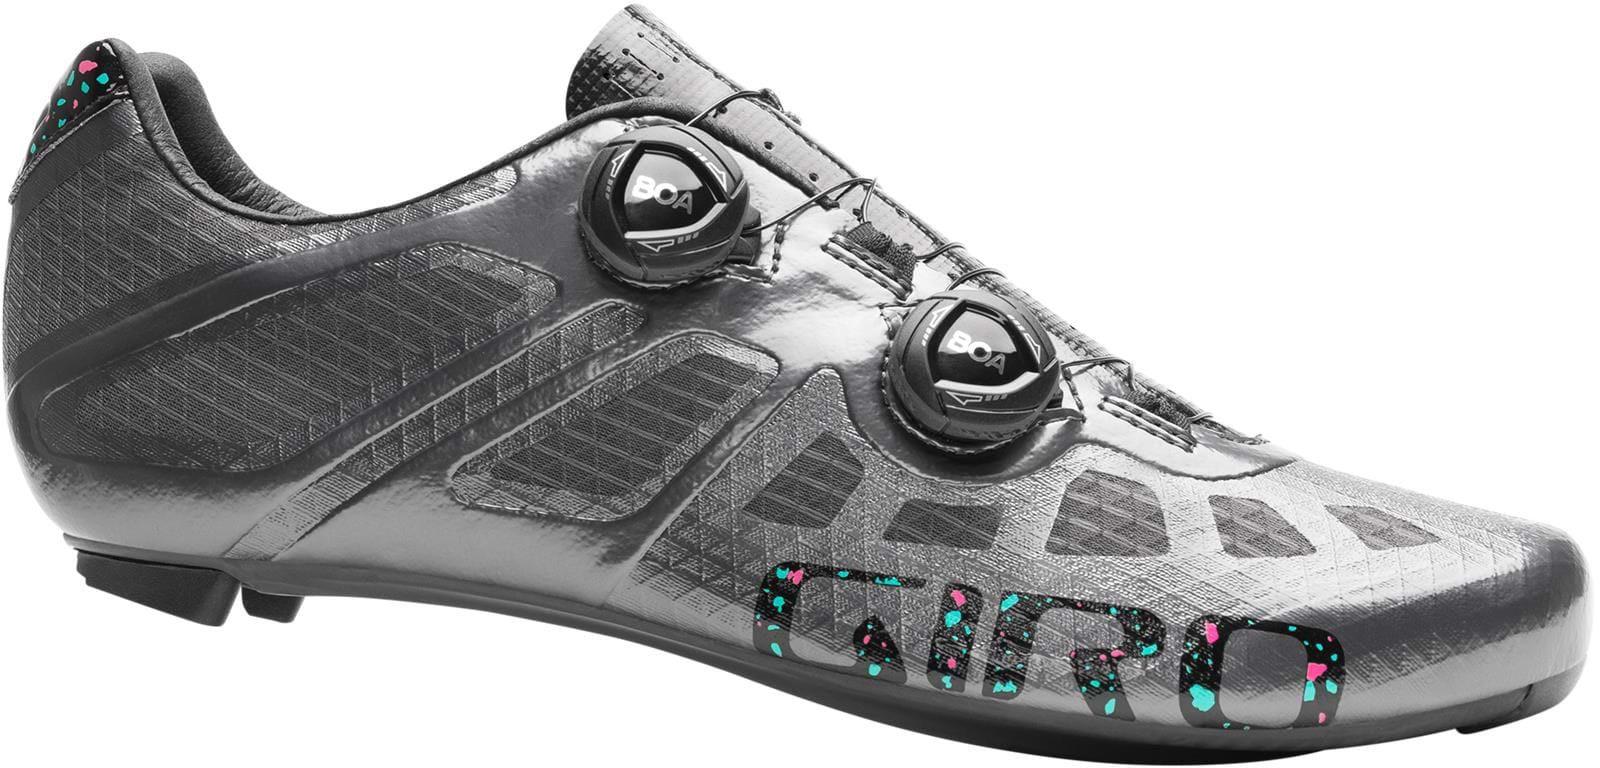 giro imperial road shoes